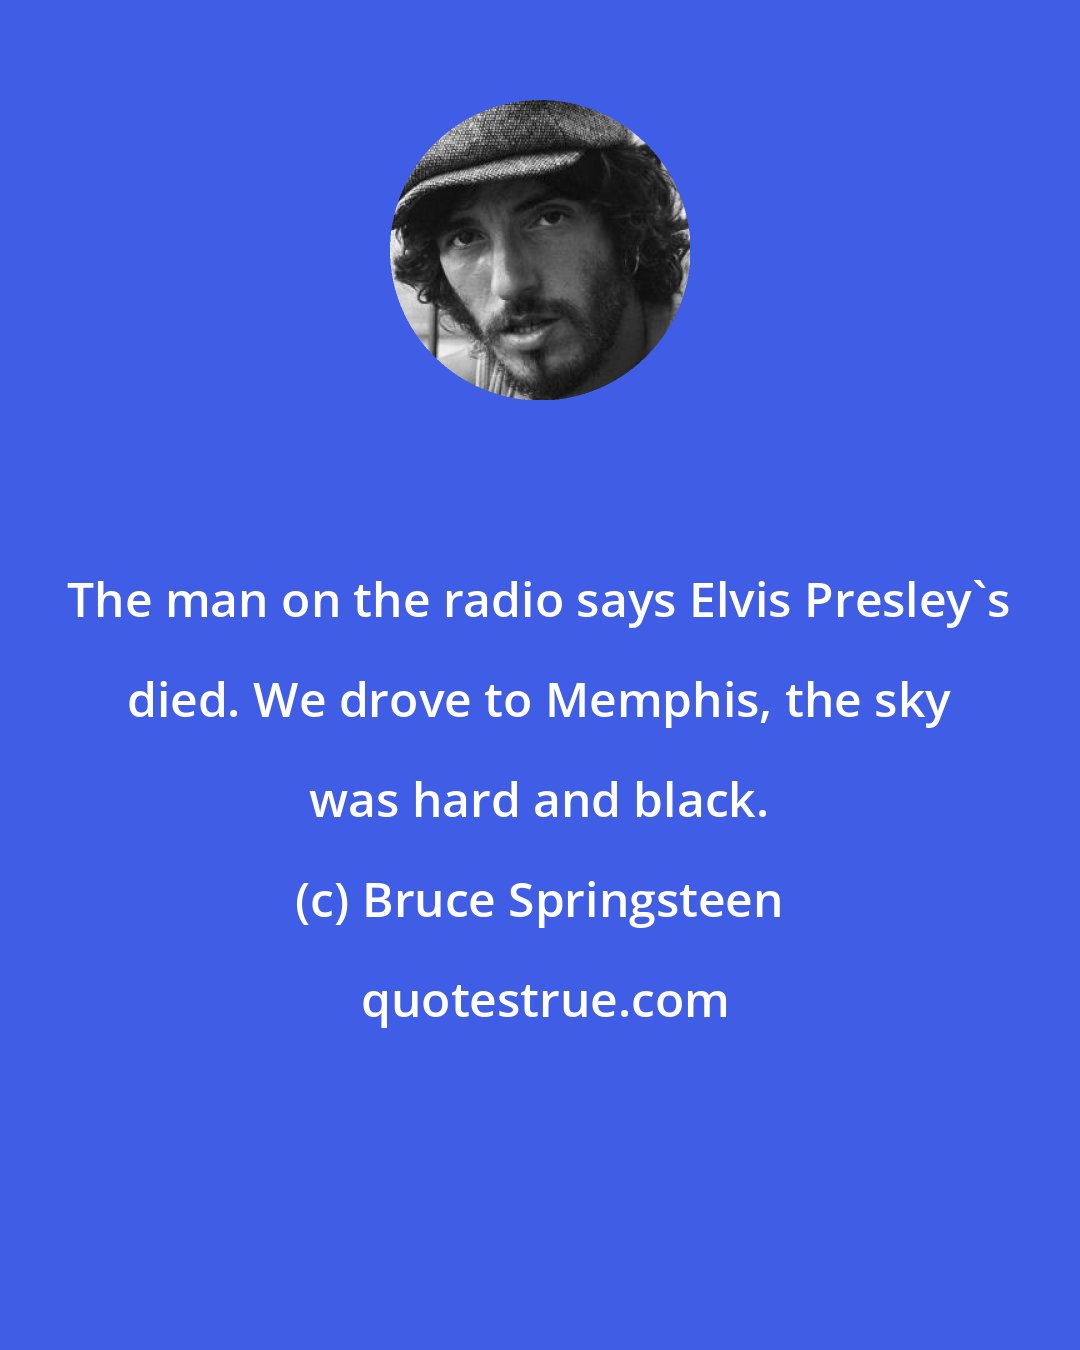 Bruce Springsteen: The man on the radio says Elvis Presley's died. We drove to Memphis, the sky was hard and black.